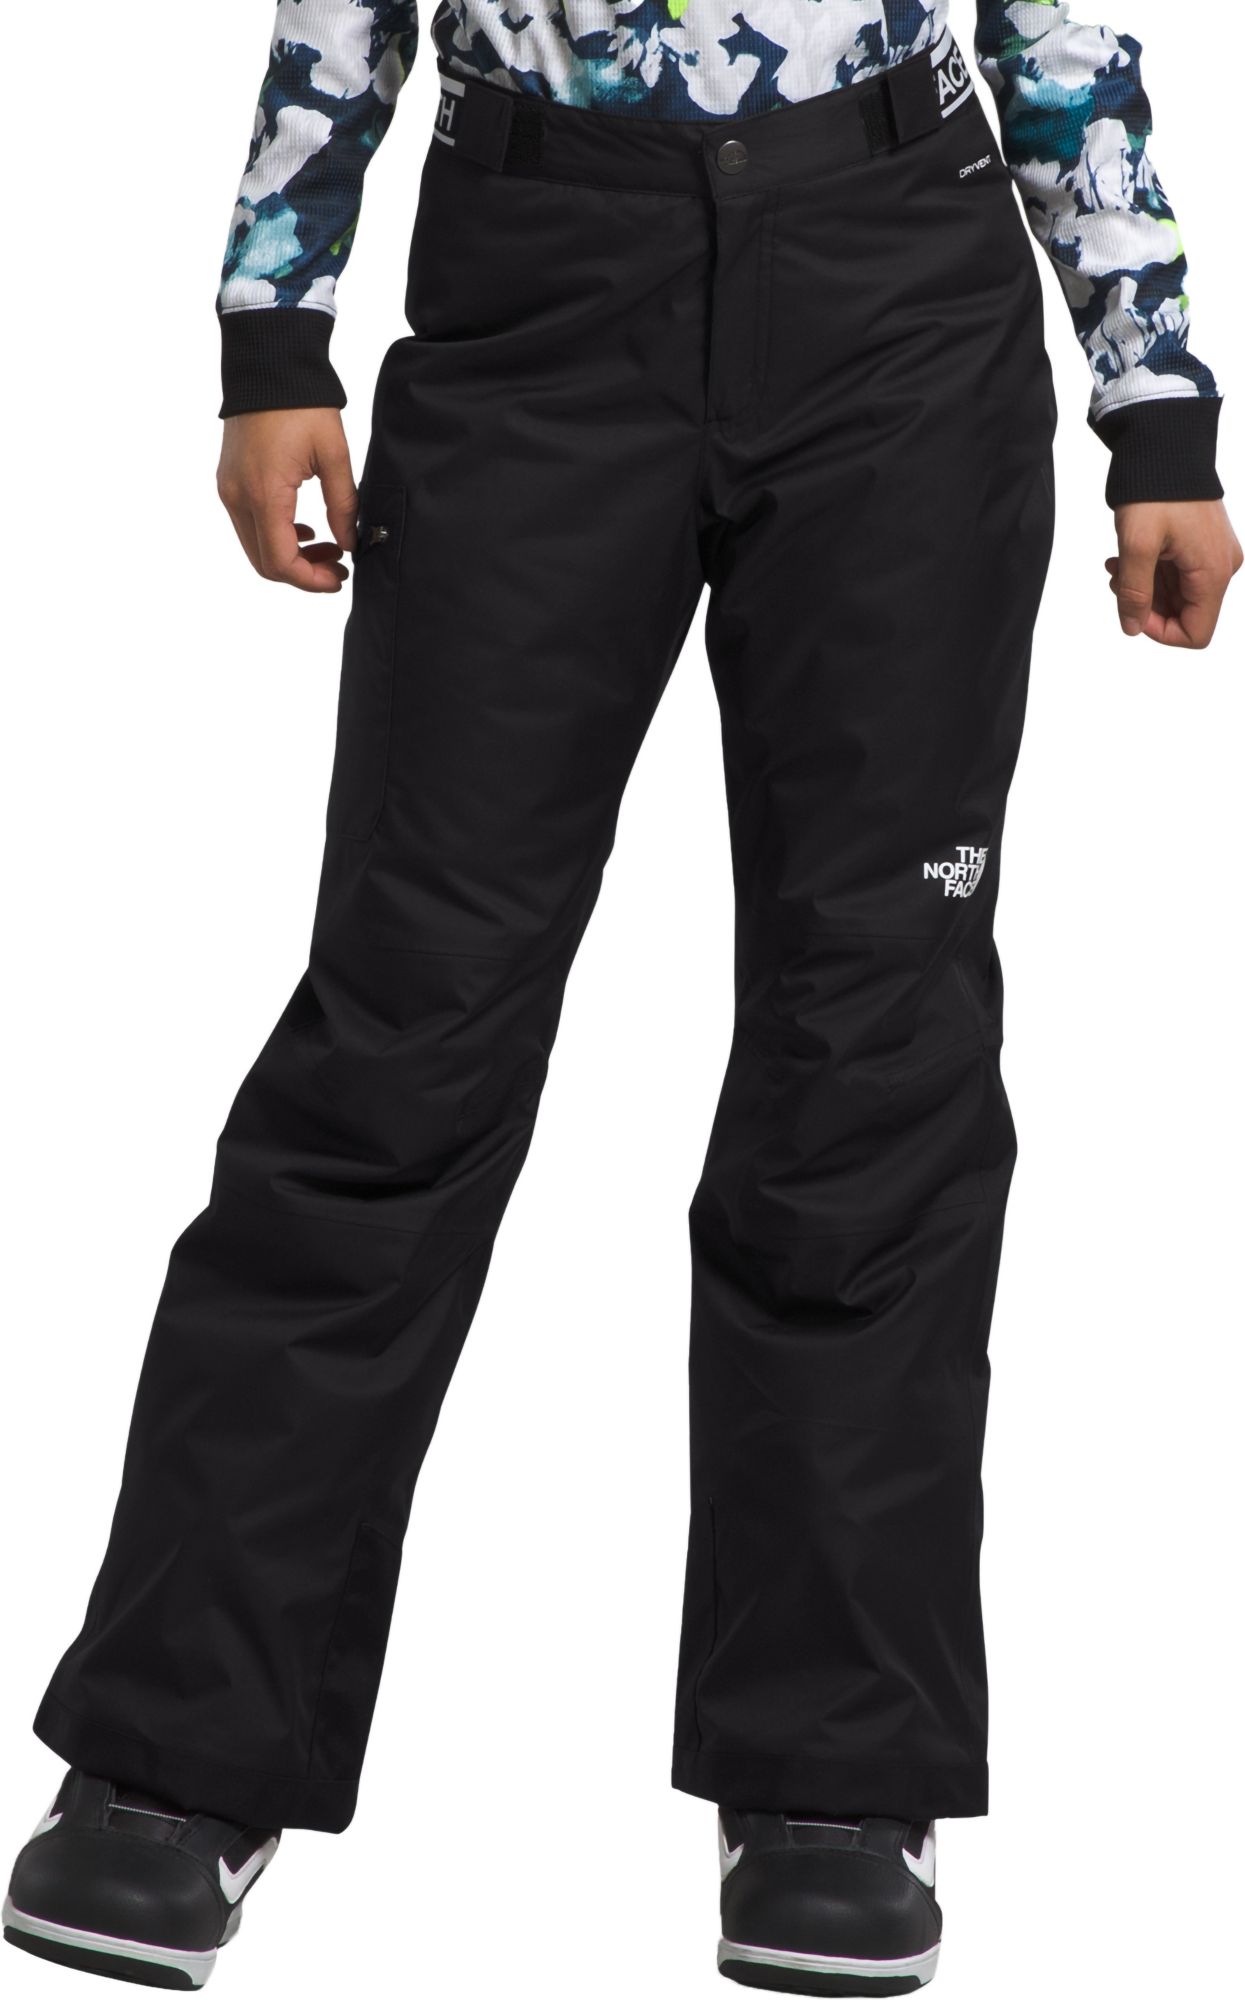 Photos - Ski Wear The North Face Girls' Freedom Insulated Pant, Large, TNF Black 23TNOGGRLSF 